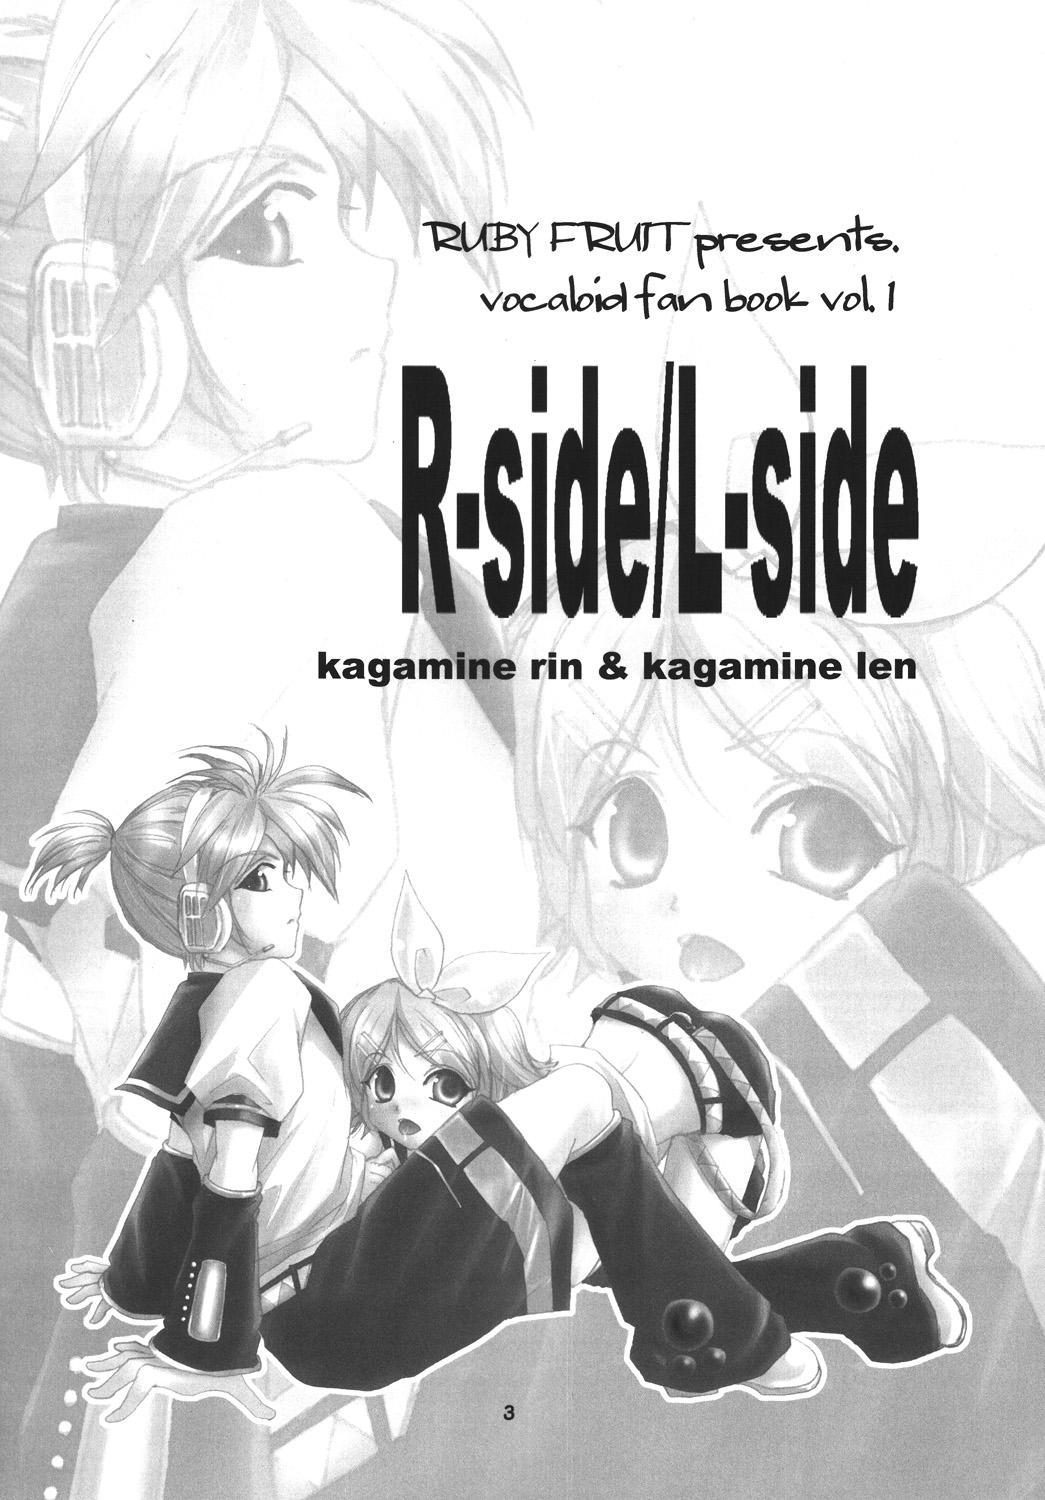 Assfuck [RUBY FRUIT (Kotoduki Z)] R-Side/L-Side (Vocaloid) [Digital] - Vocaloid Delicia - Picture 2